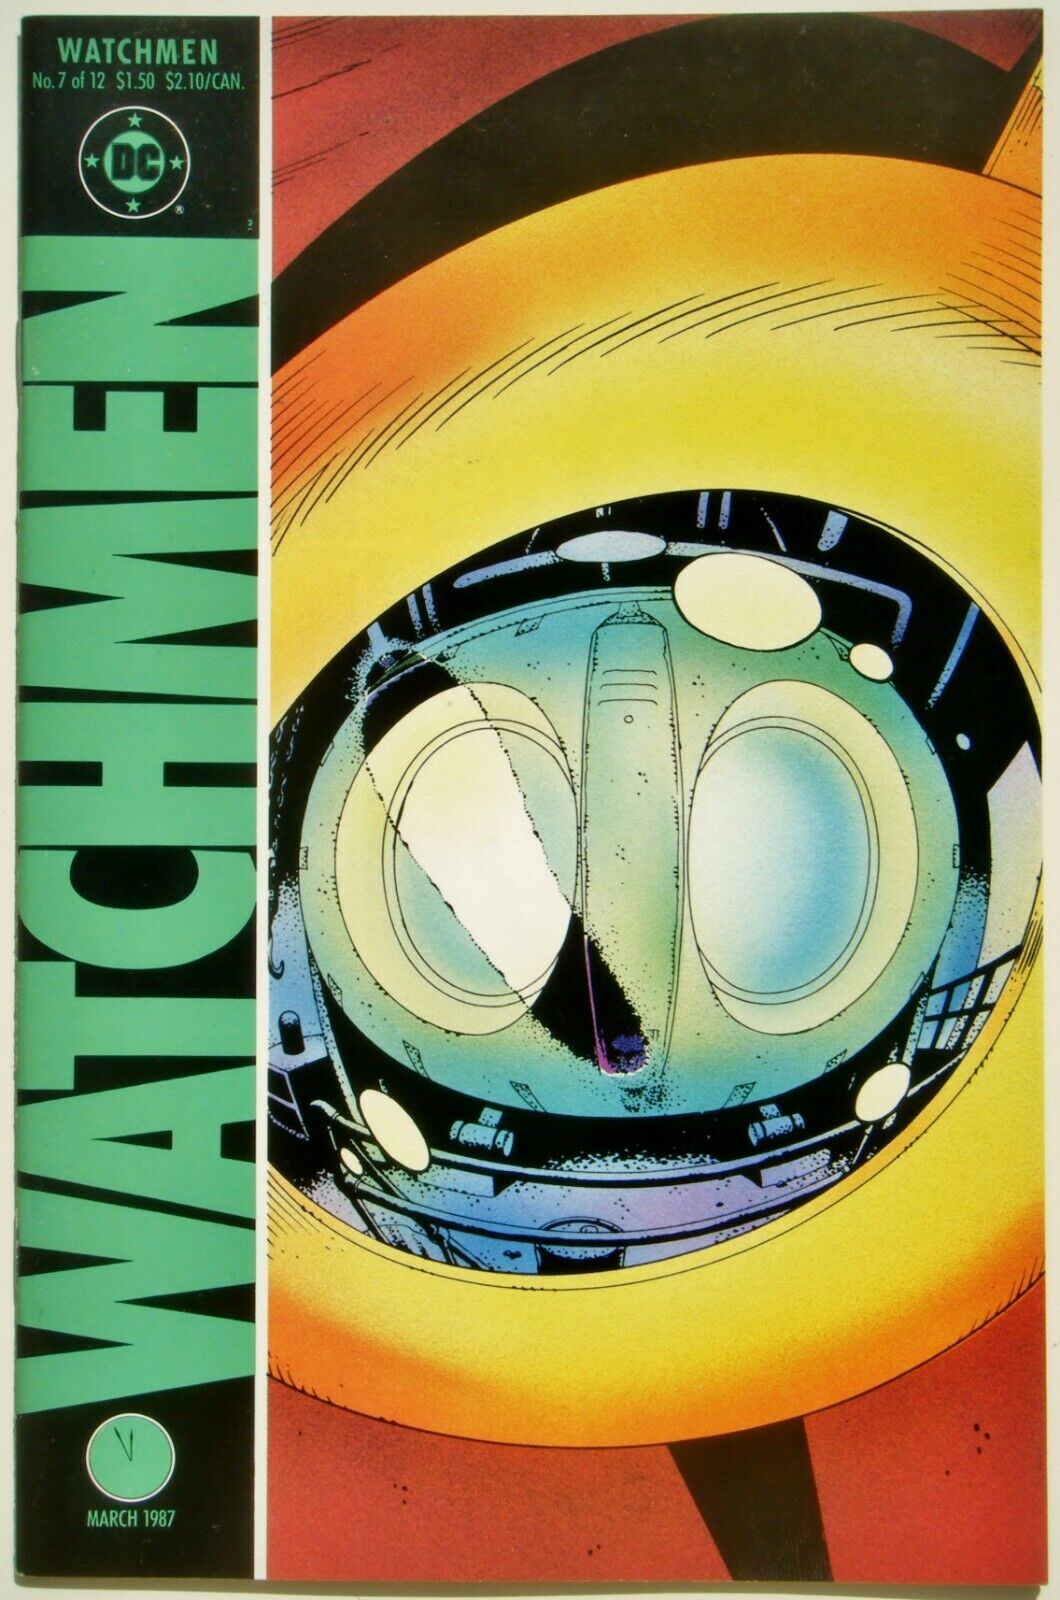 Watchmen #7 (of 12) (Mar. 87\') NM (9.4) Alan Moore Scripts & Gibbons Cover & Art